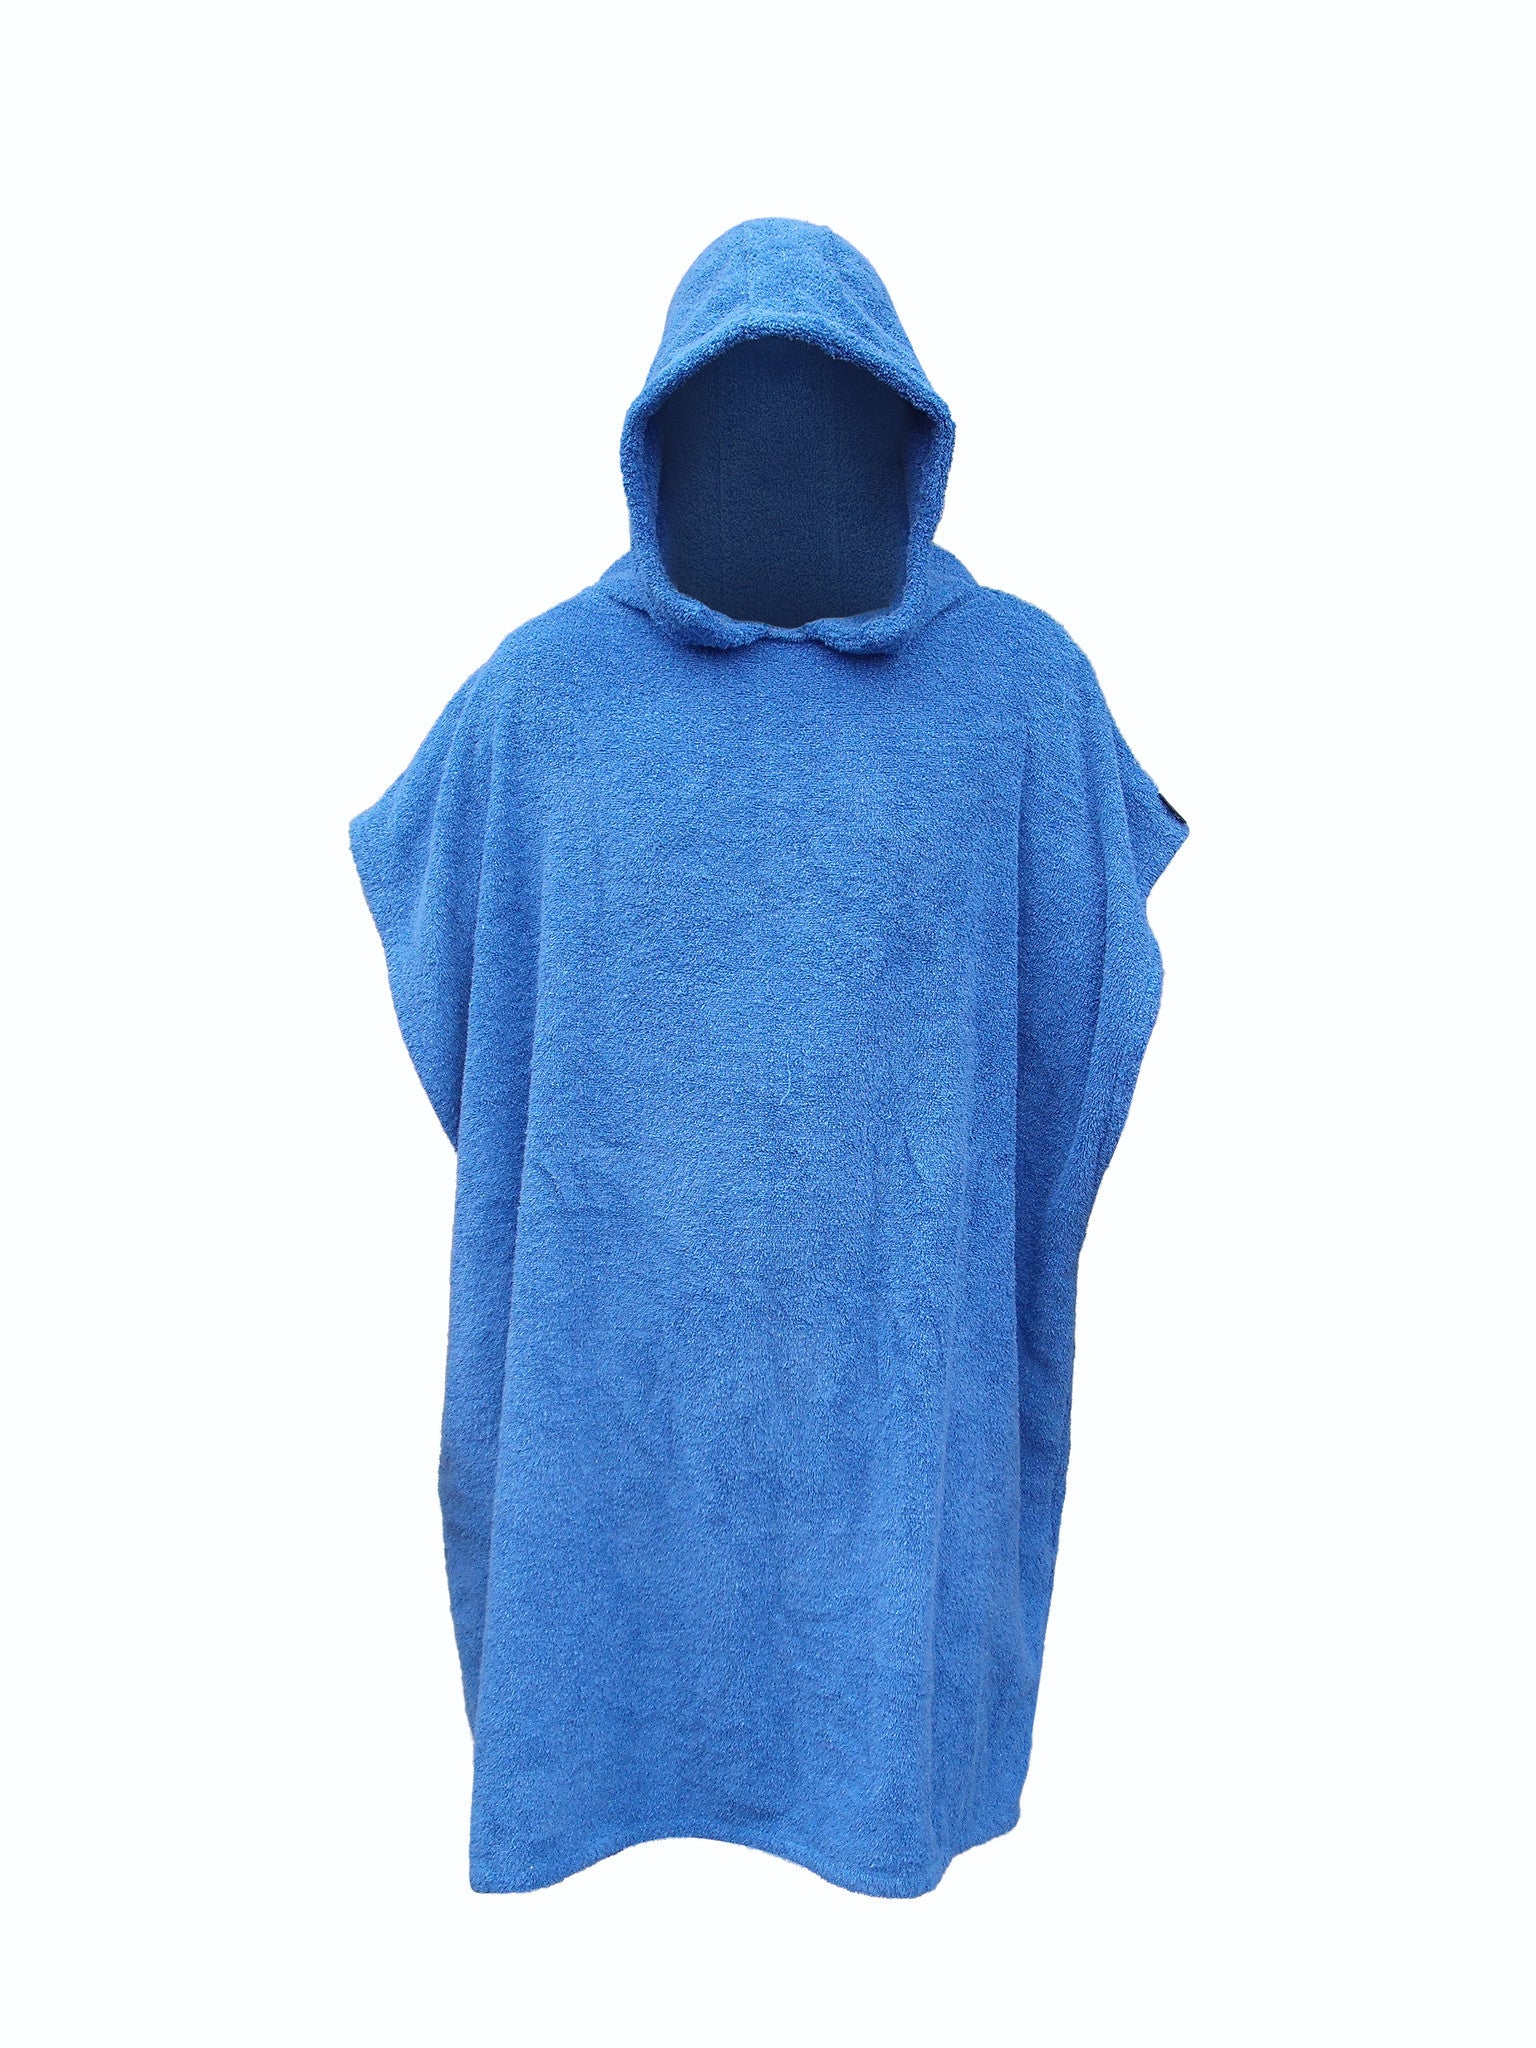 Large Surf Poncho - Thin Turkish Cotton Beach Robe Hooded Wetsuit Changing  Towel | Ultra Thin Quick Dry | Sandproof | 100% Turkish Cotton (Navy Blue